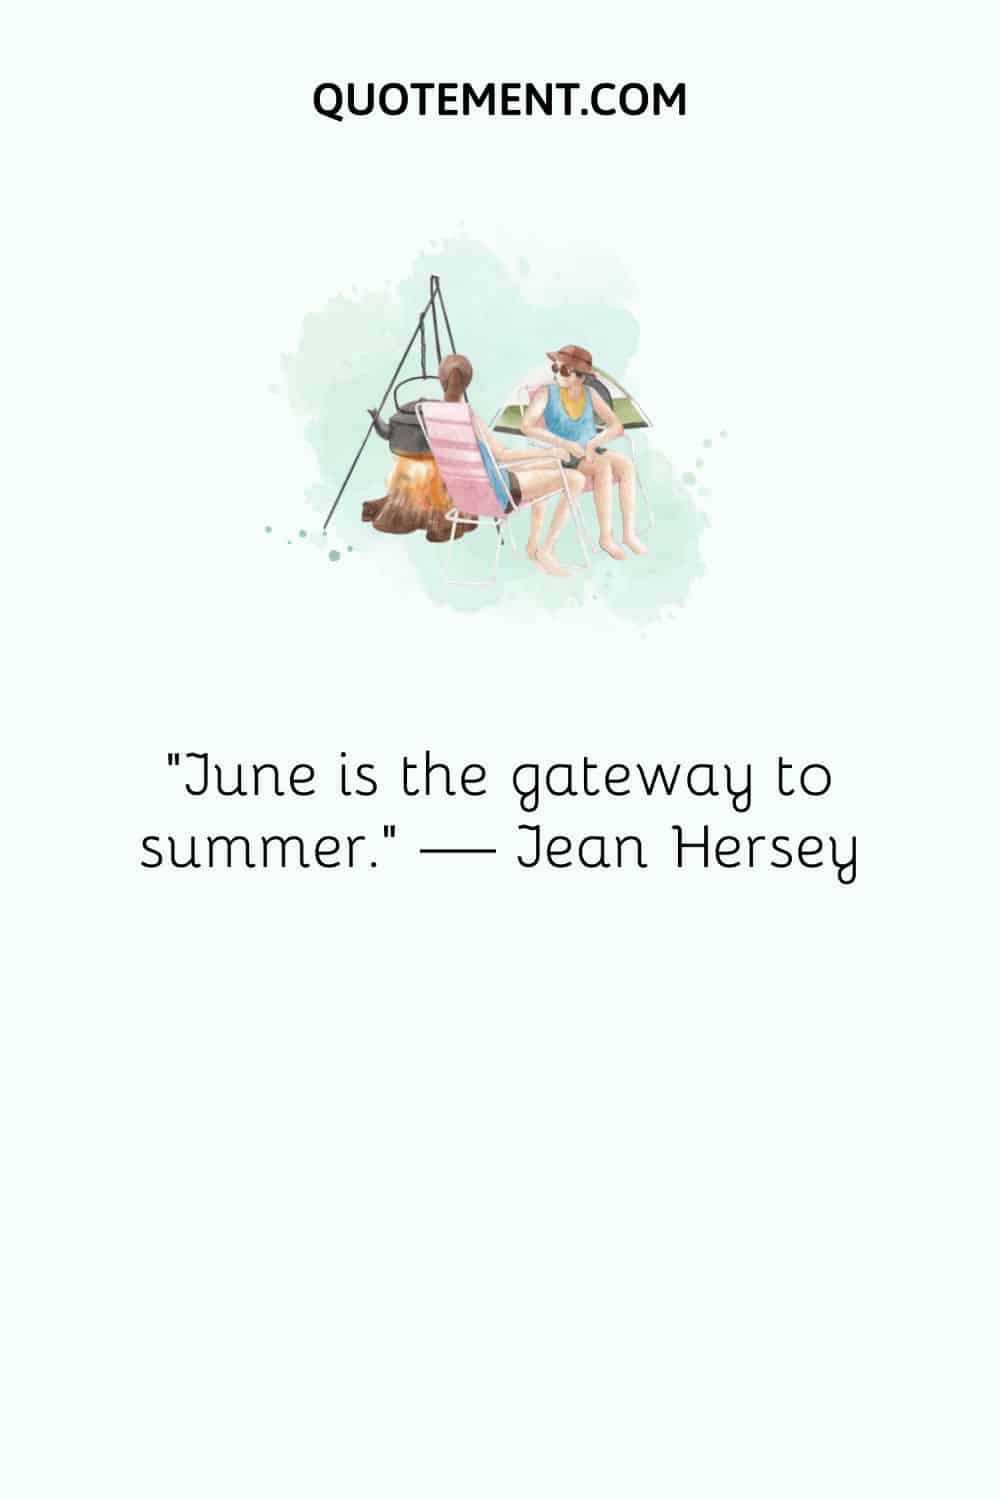 “June is the gateway to summer.” — Jean Hersey